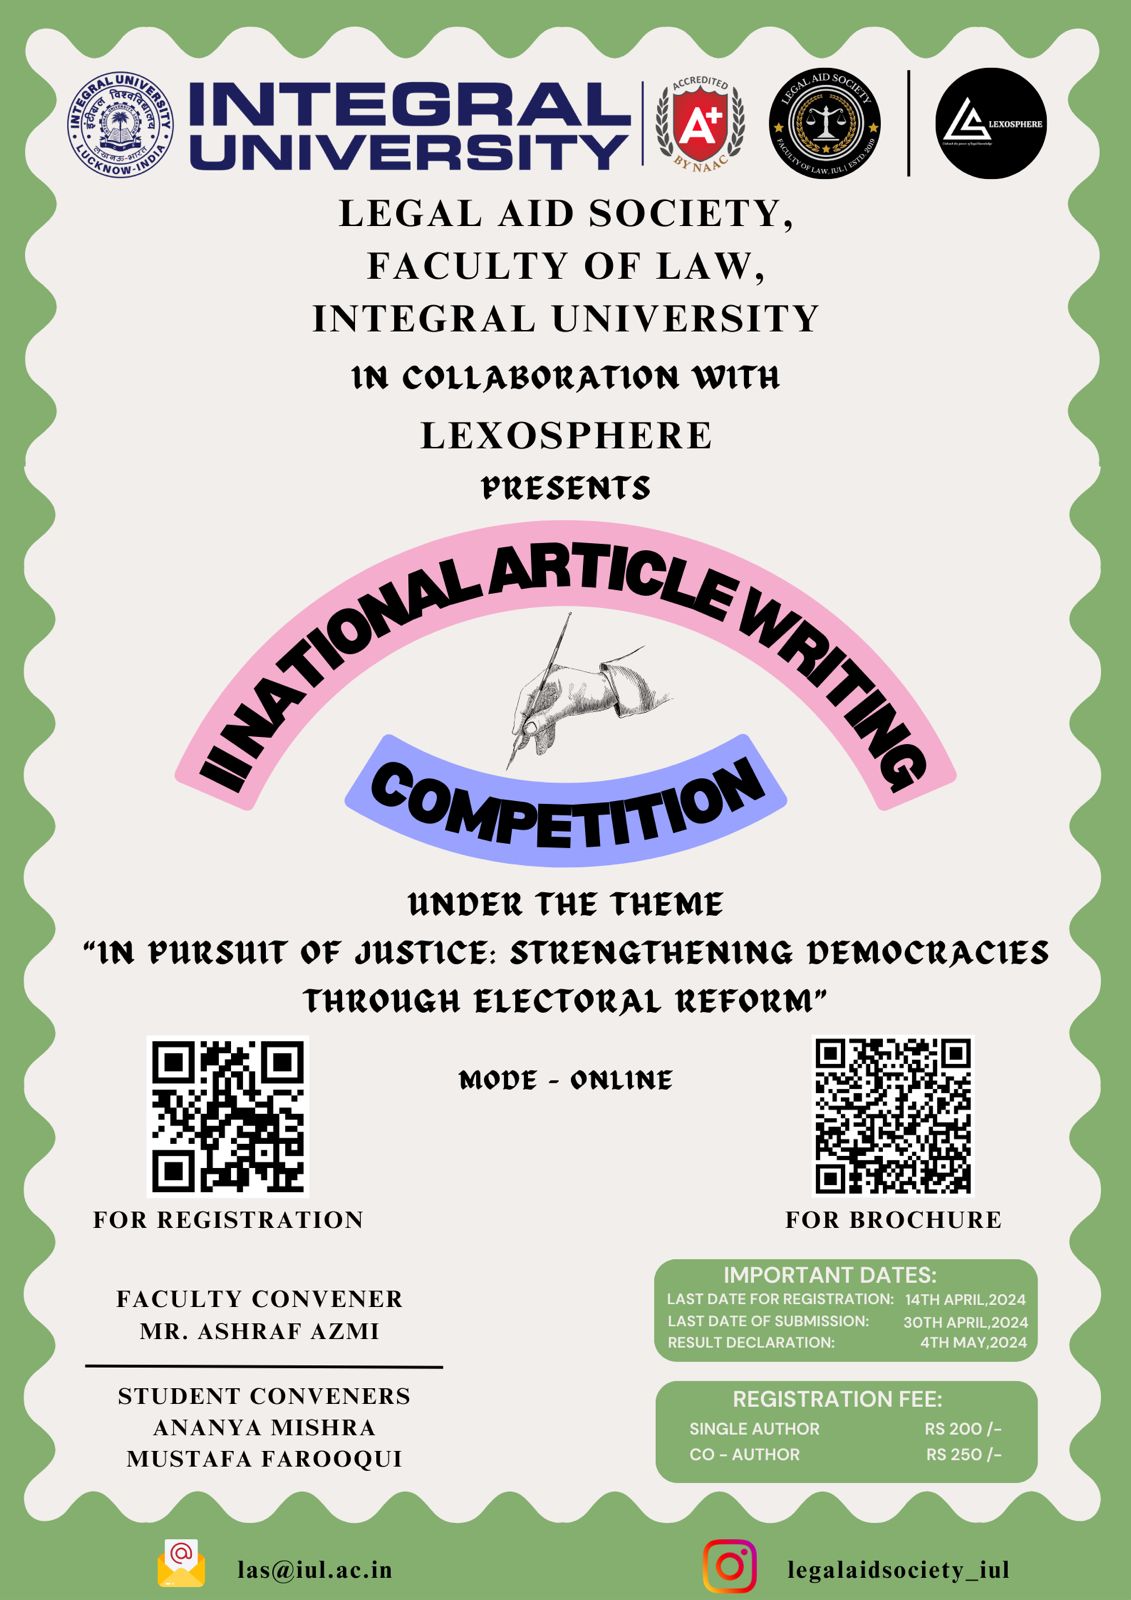 II National Article Writing Competition